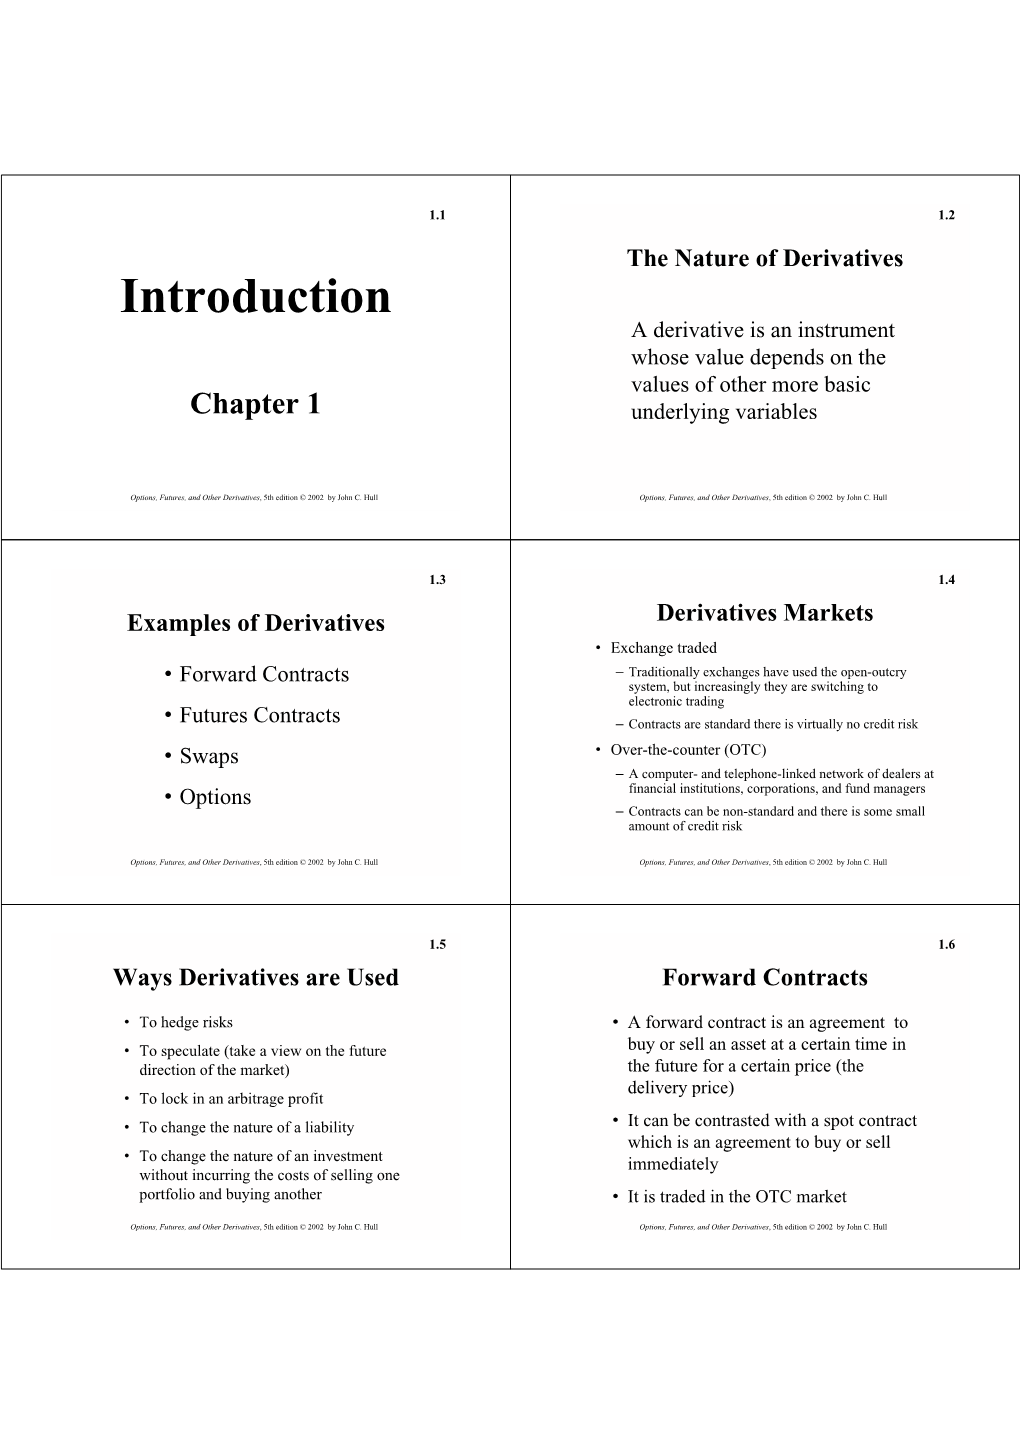 Introduction a Derivative Is an Instrument Whose Value Depends on the Values of Other More Basic Chapter 1 Underlying Variables